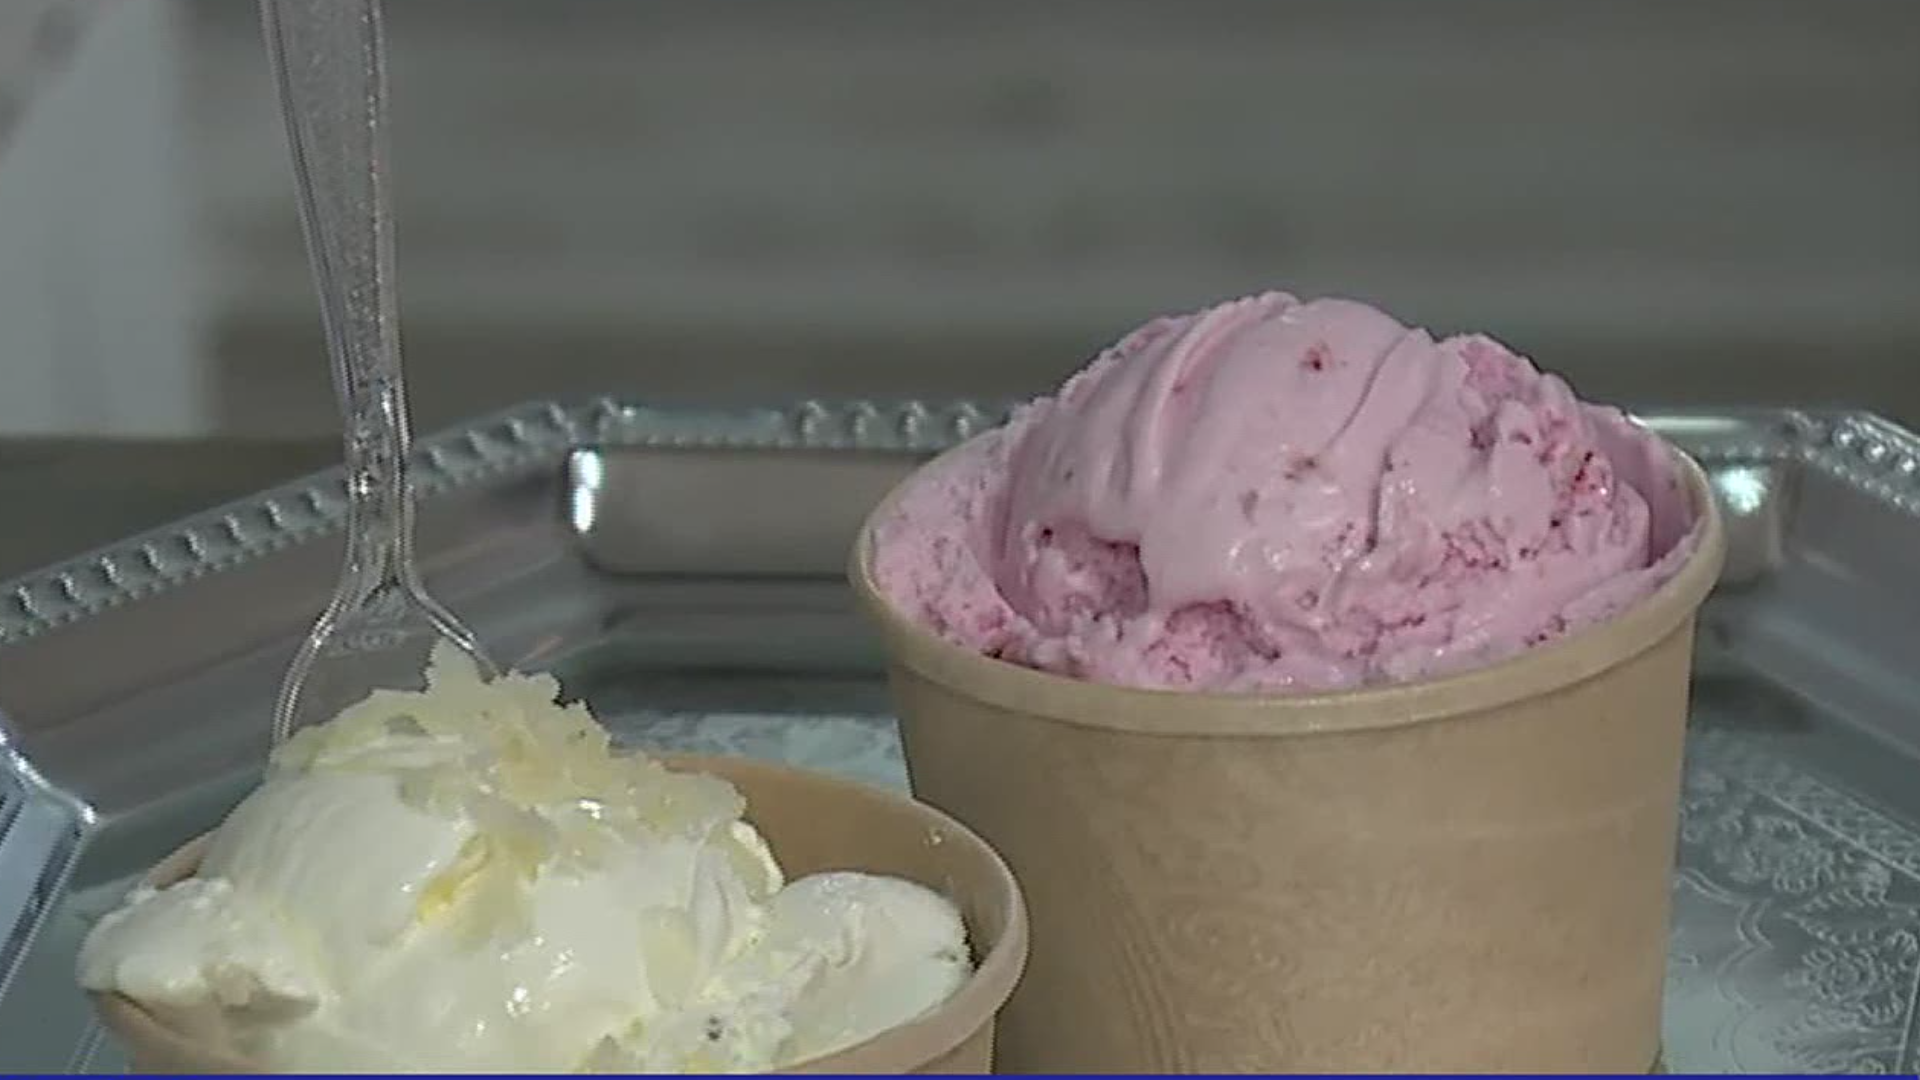 A lot of people are looking for all the luck they can get with 2021, so let's try a new thing - Sauerkraut ice cream!